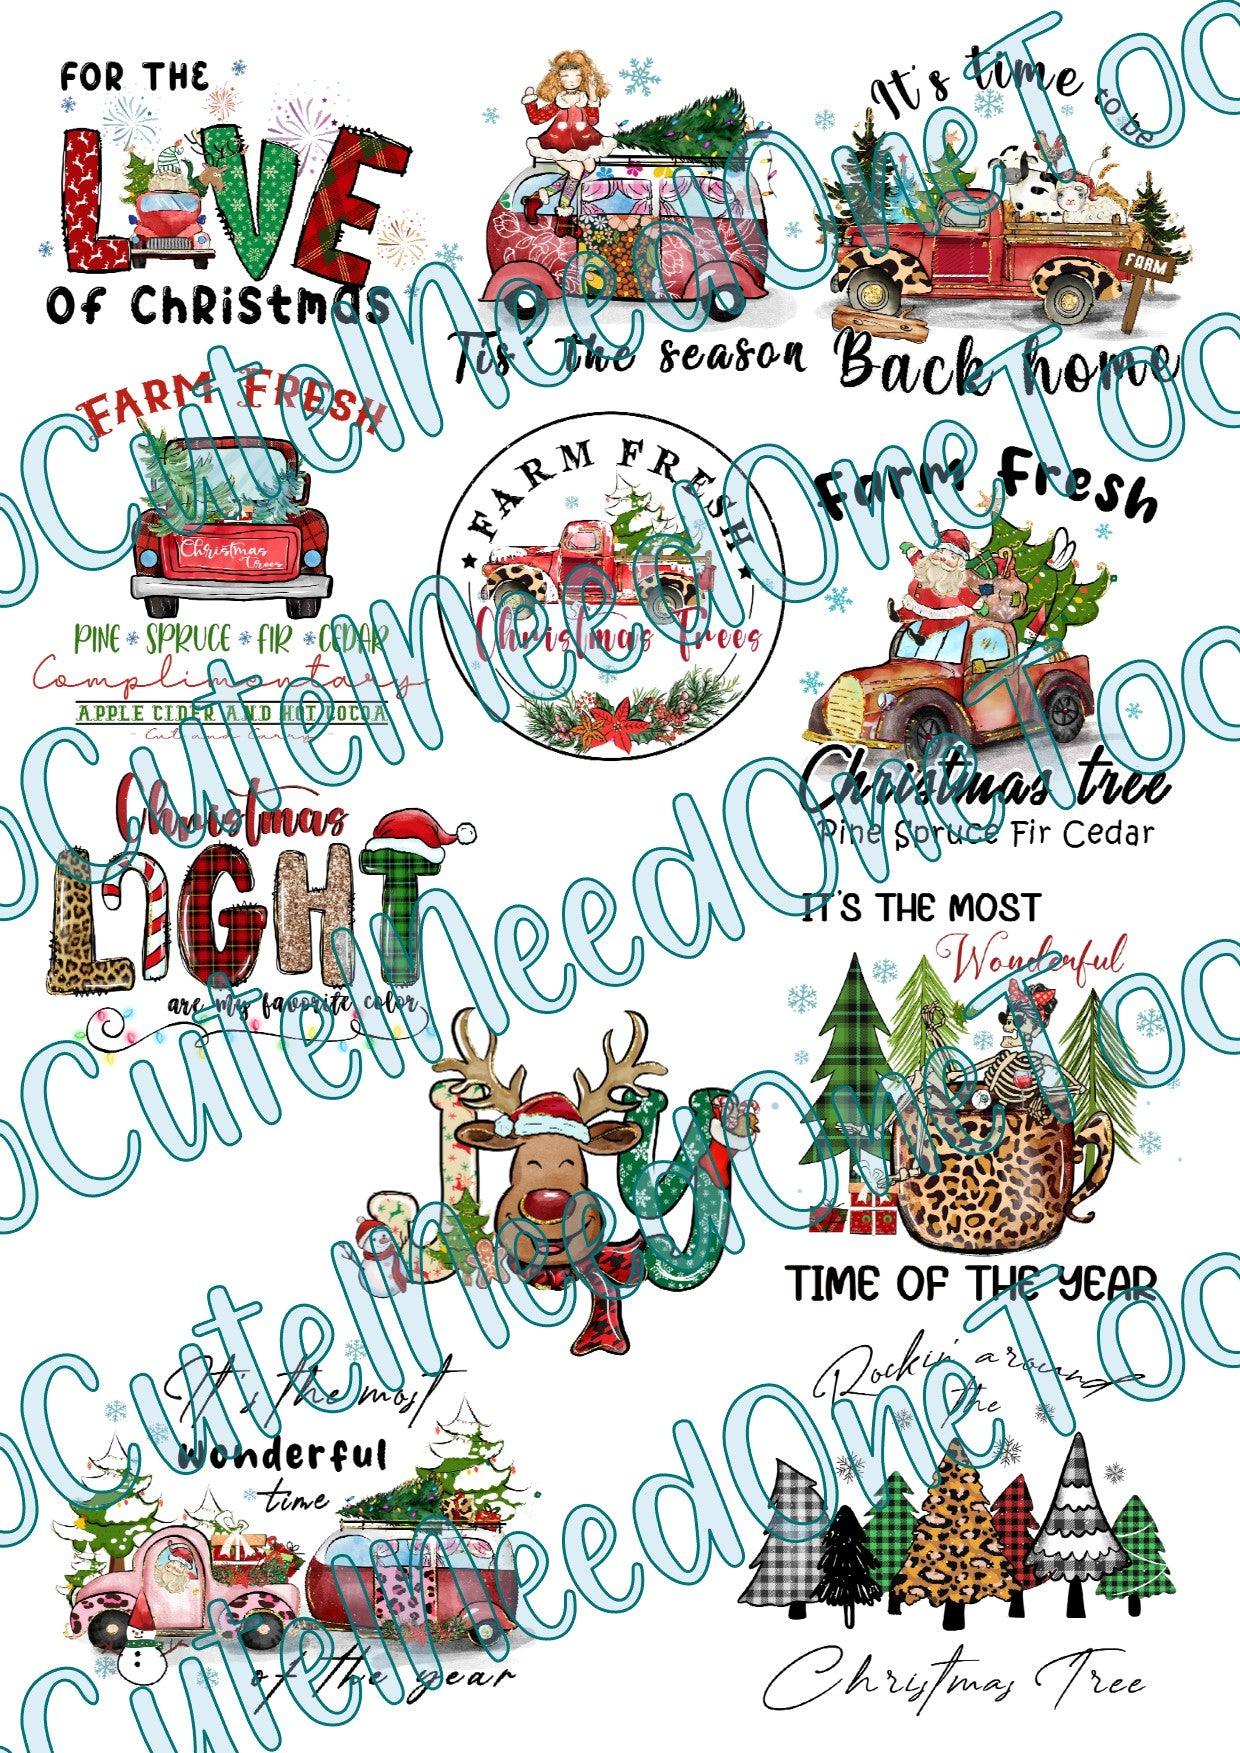 For The Love Of Christmas - On Clear/White Waterslide Paper - Ready To Use - SoCuteINeedOneToo